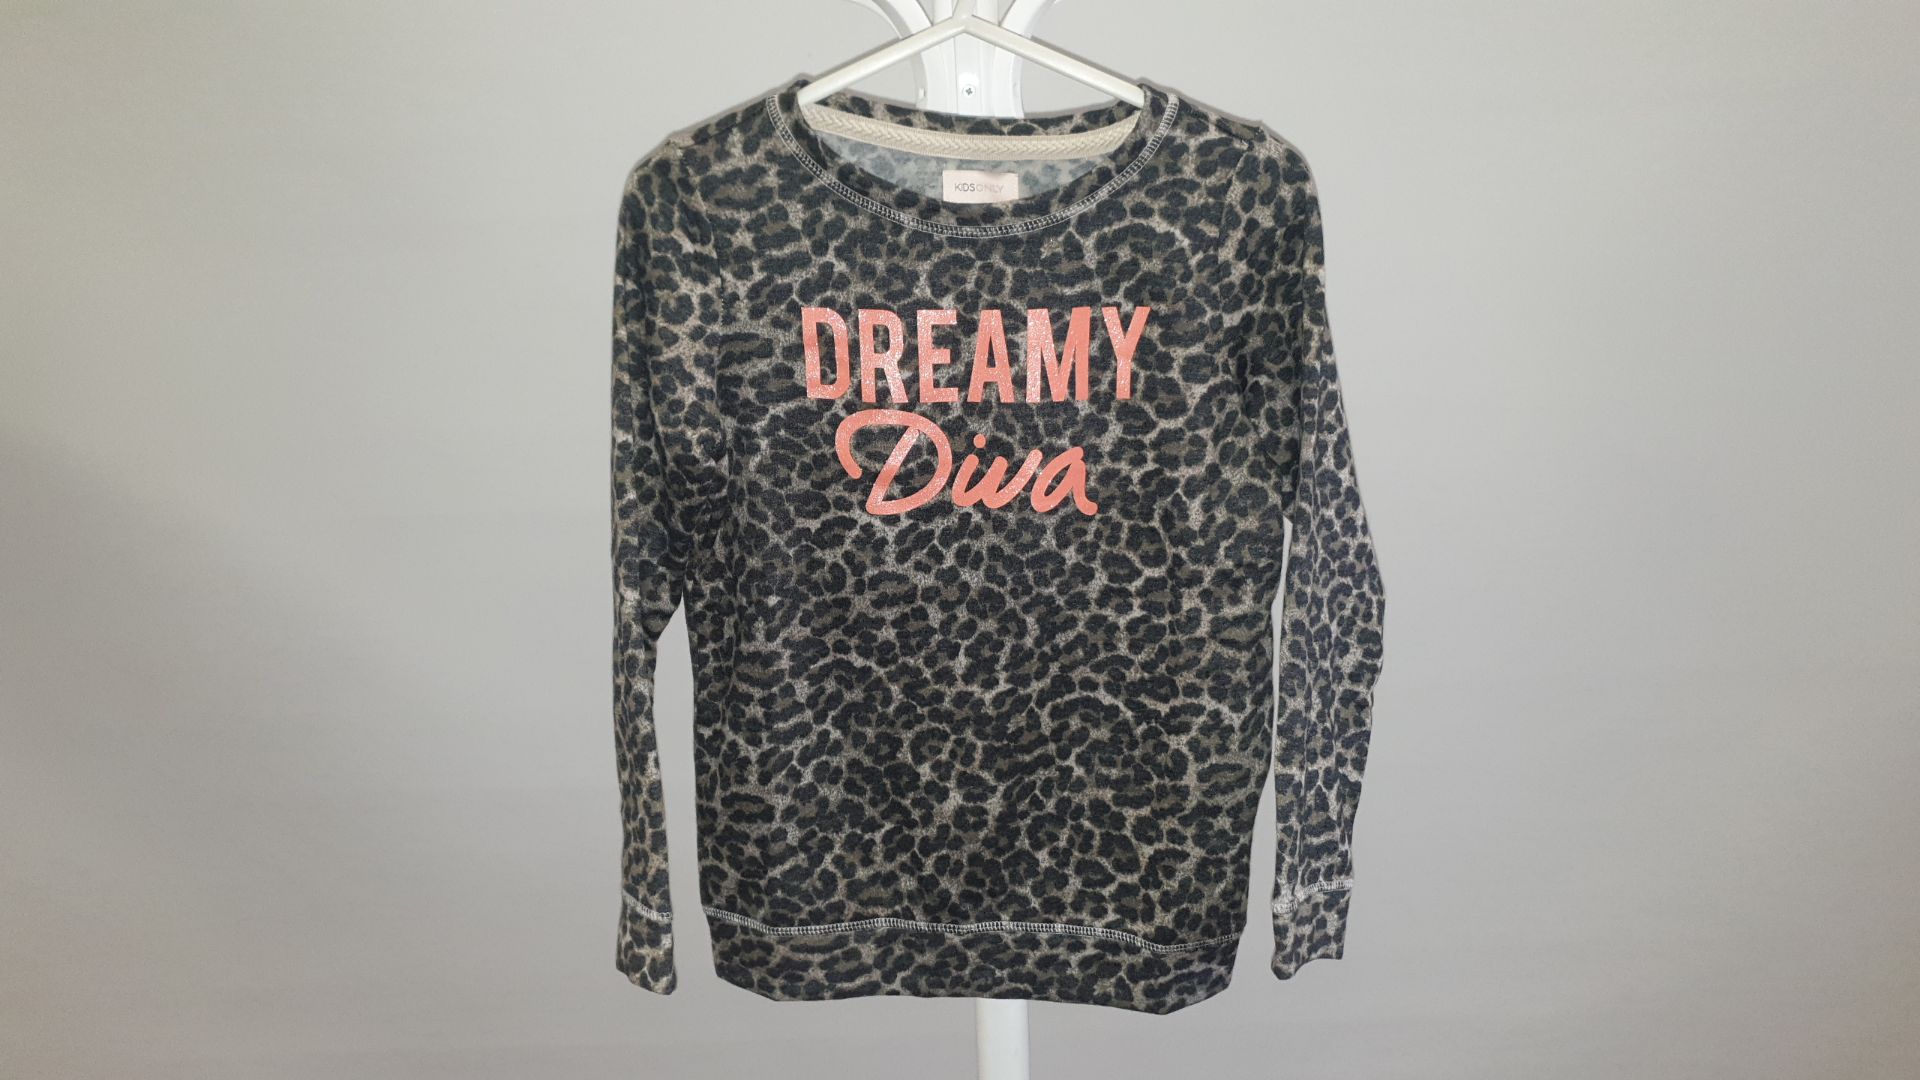 10 X BRAND NEW KIDS ONLY DREAMY DIVA LEOPARD PRINT TOPS SIZE 122-128 (7 - 8 YEARS)